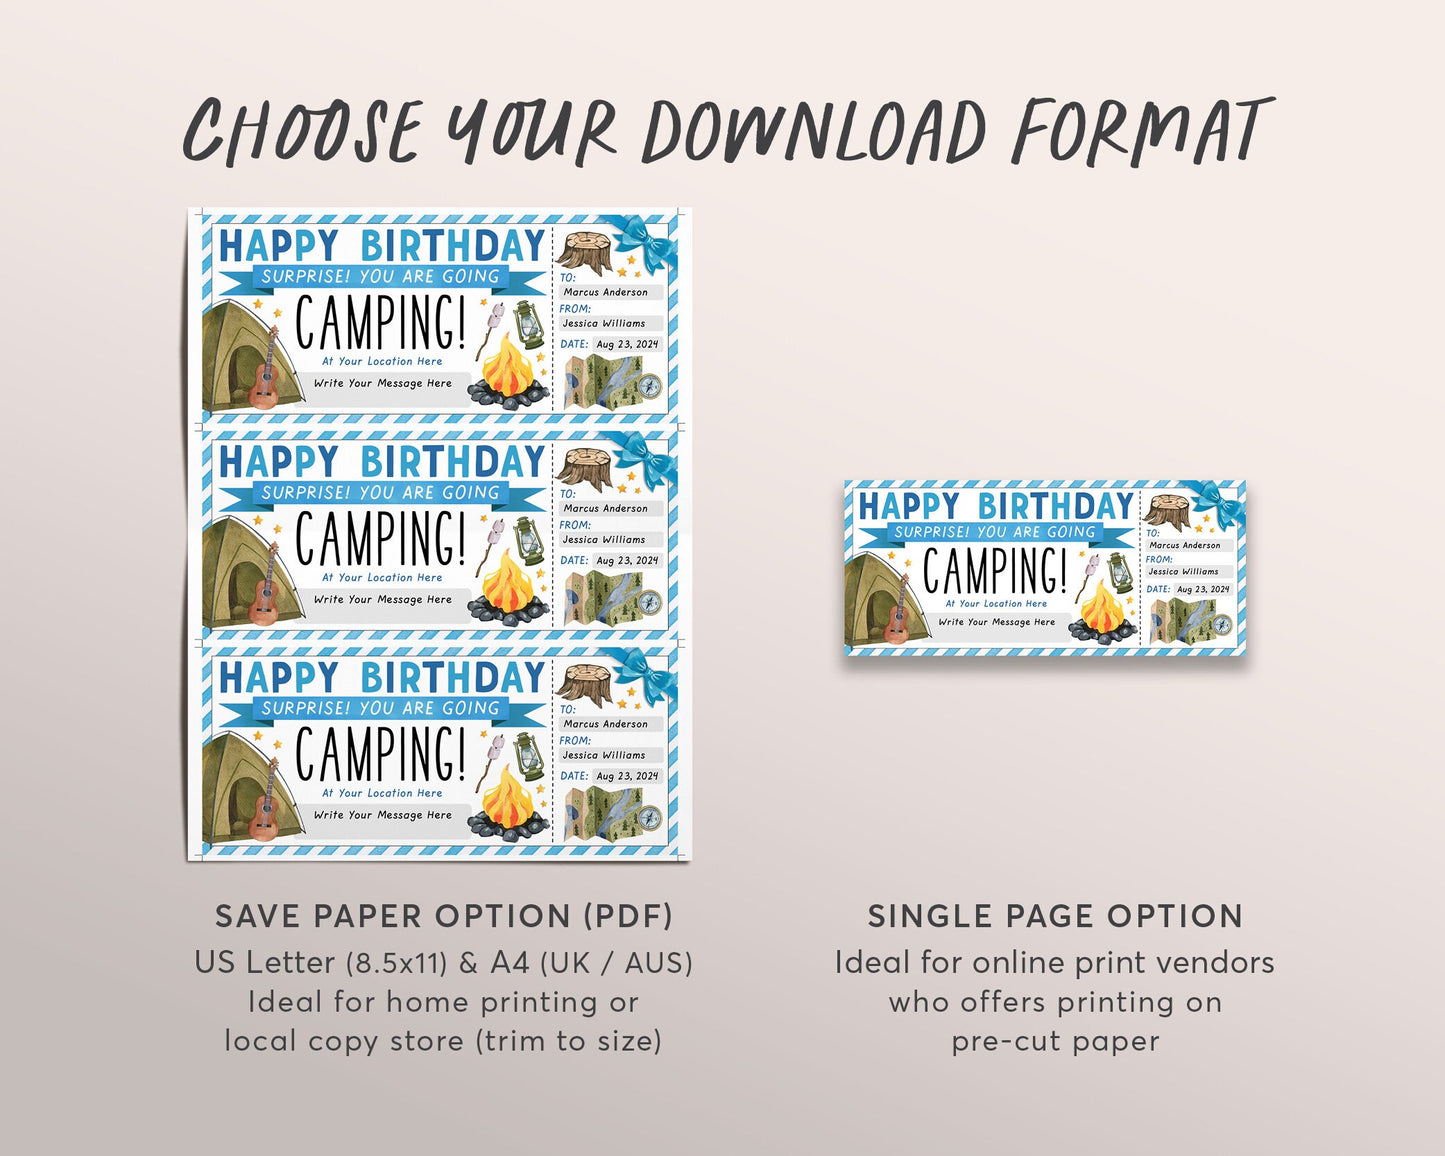 Camping Trip Ticket Editable Template, Birthday Weekend Trip Reveal Gift Certificate For Him, Wilderness Hiking Experience Voucher Coupon